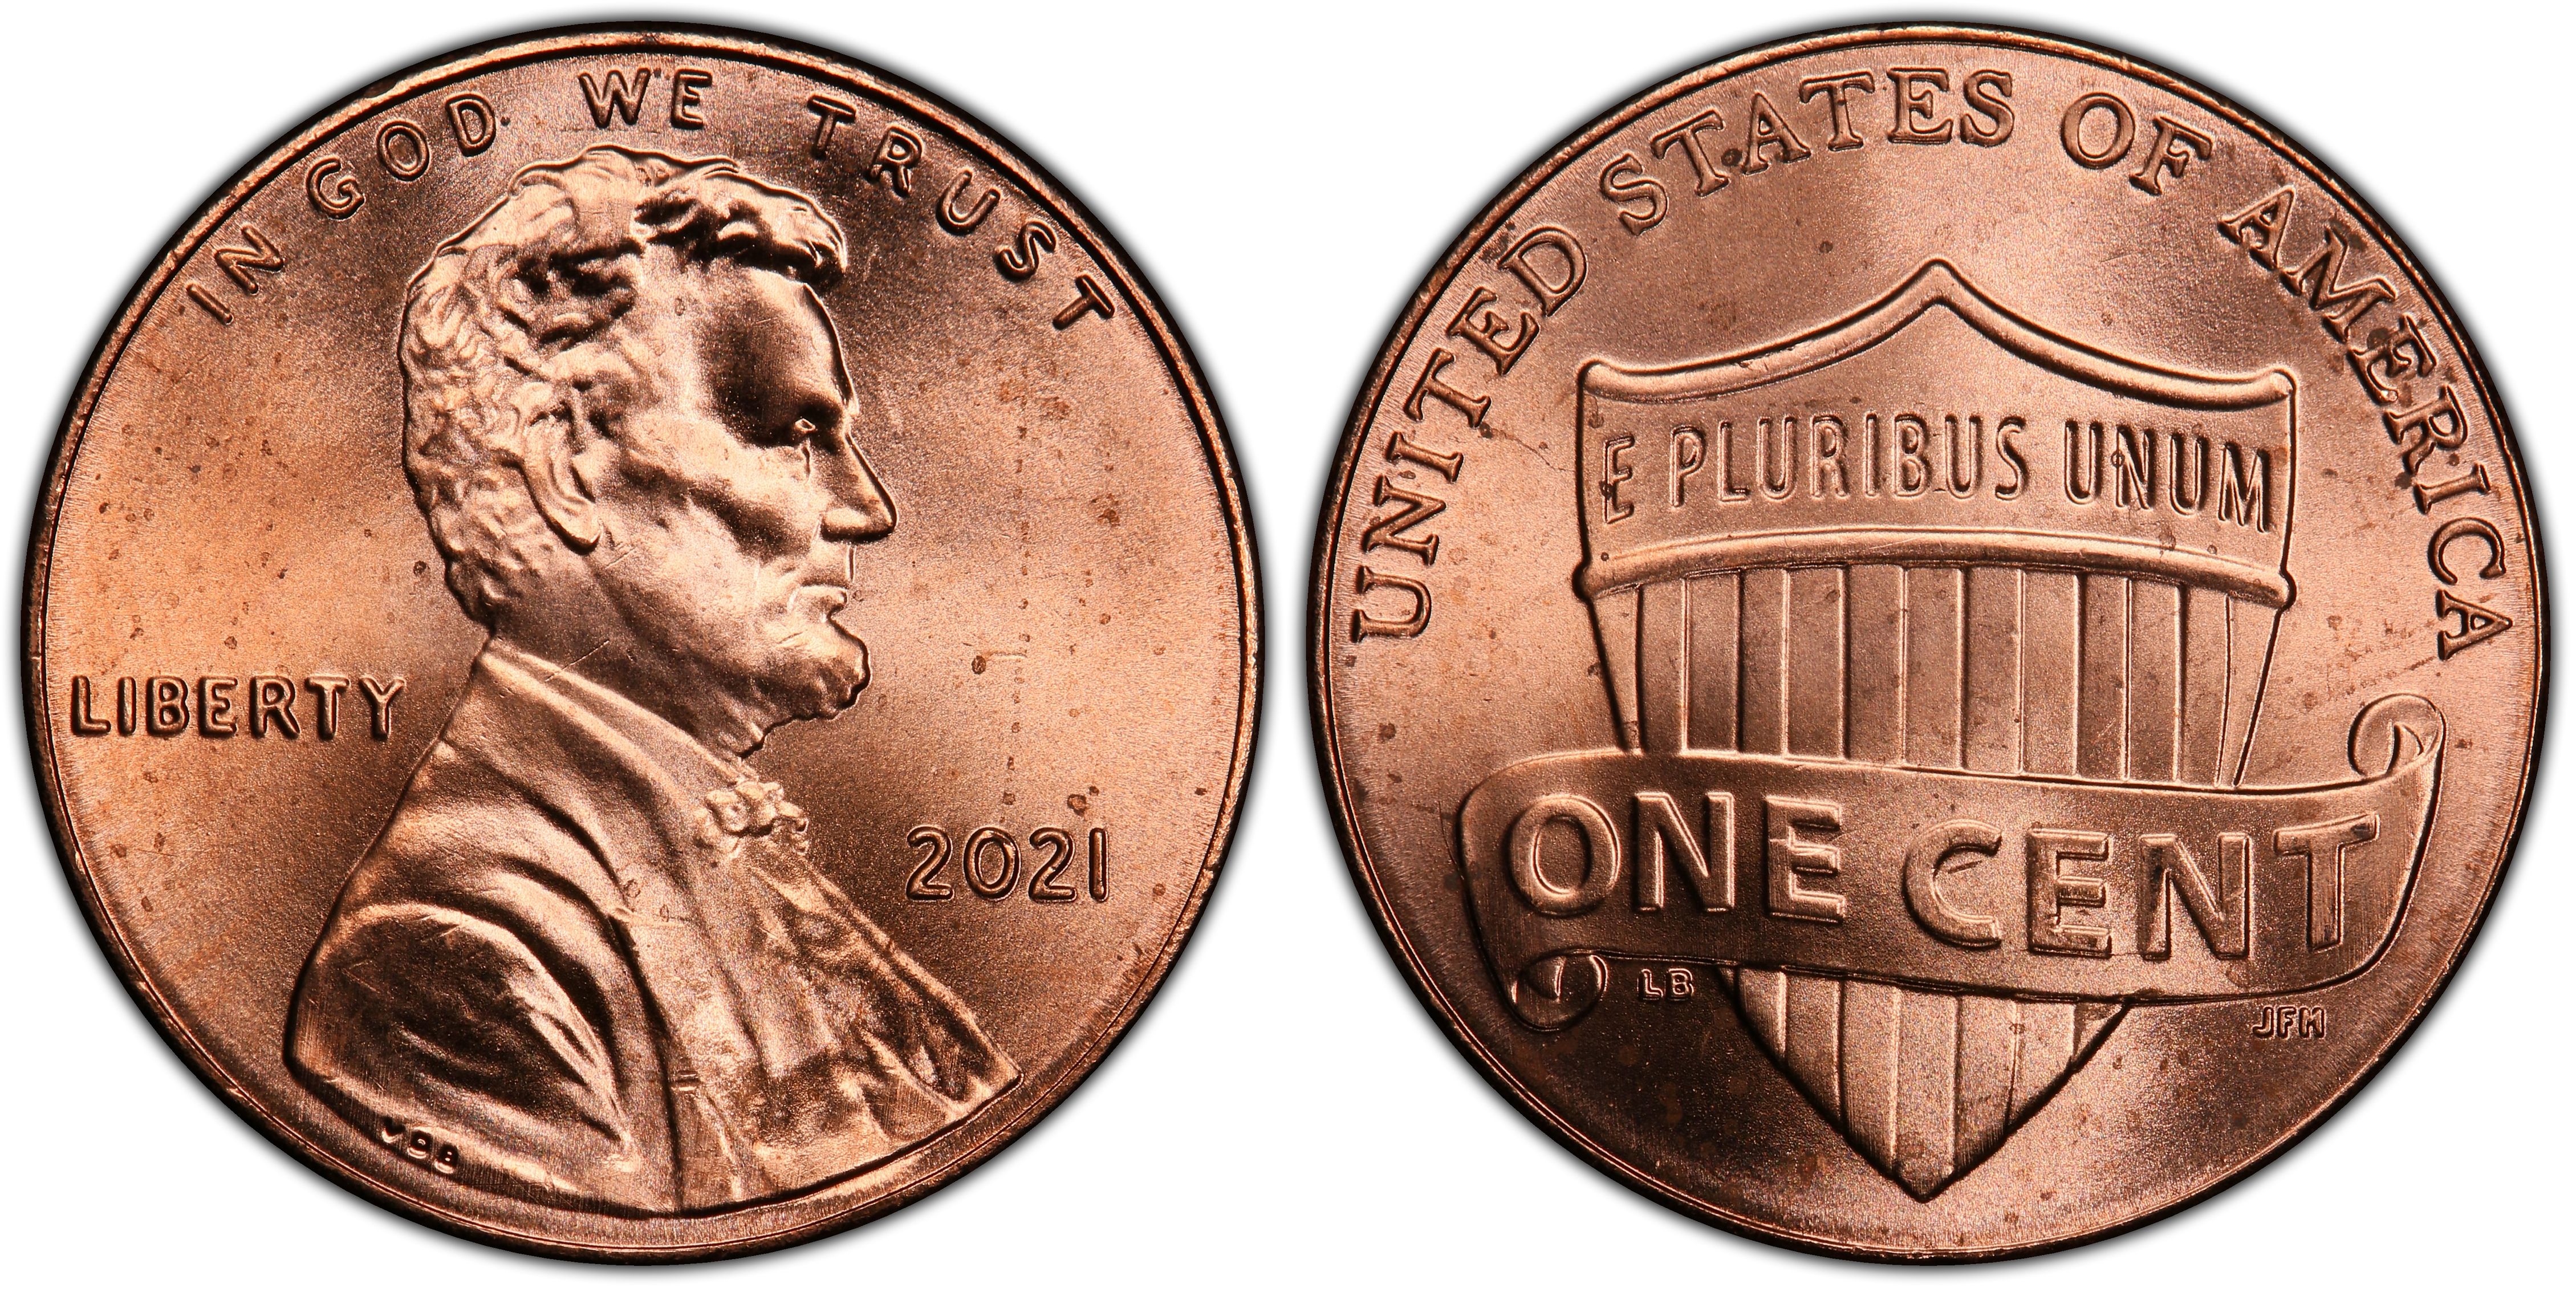 1964 1C, RD (Regular Strike) Lincoln Cent (Modern) - PCGS CoinFacts